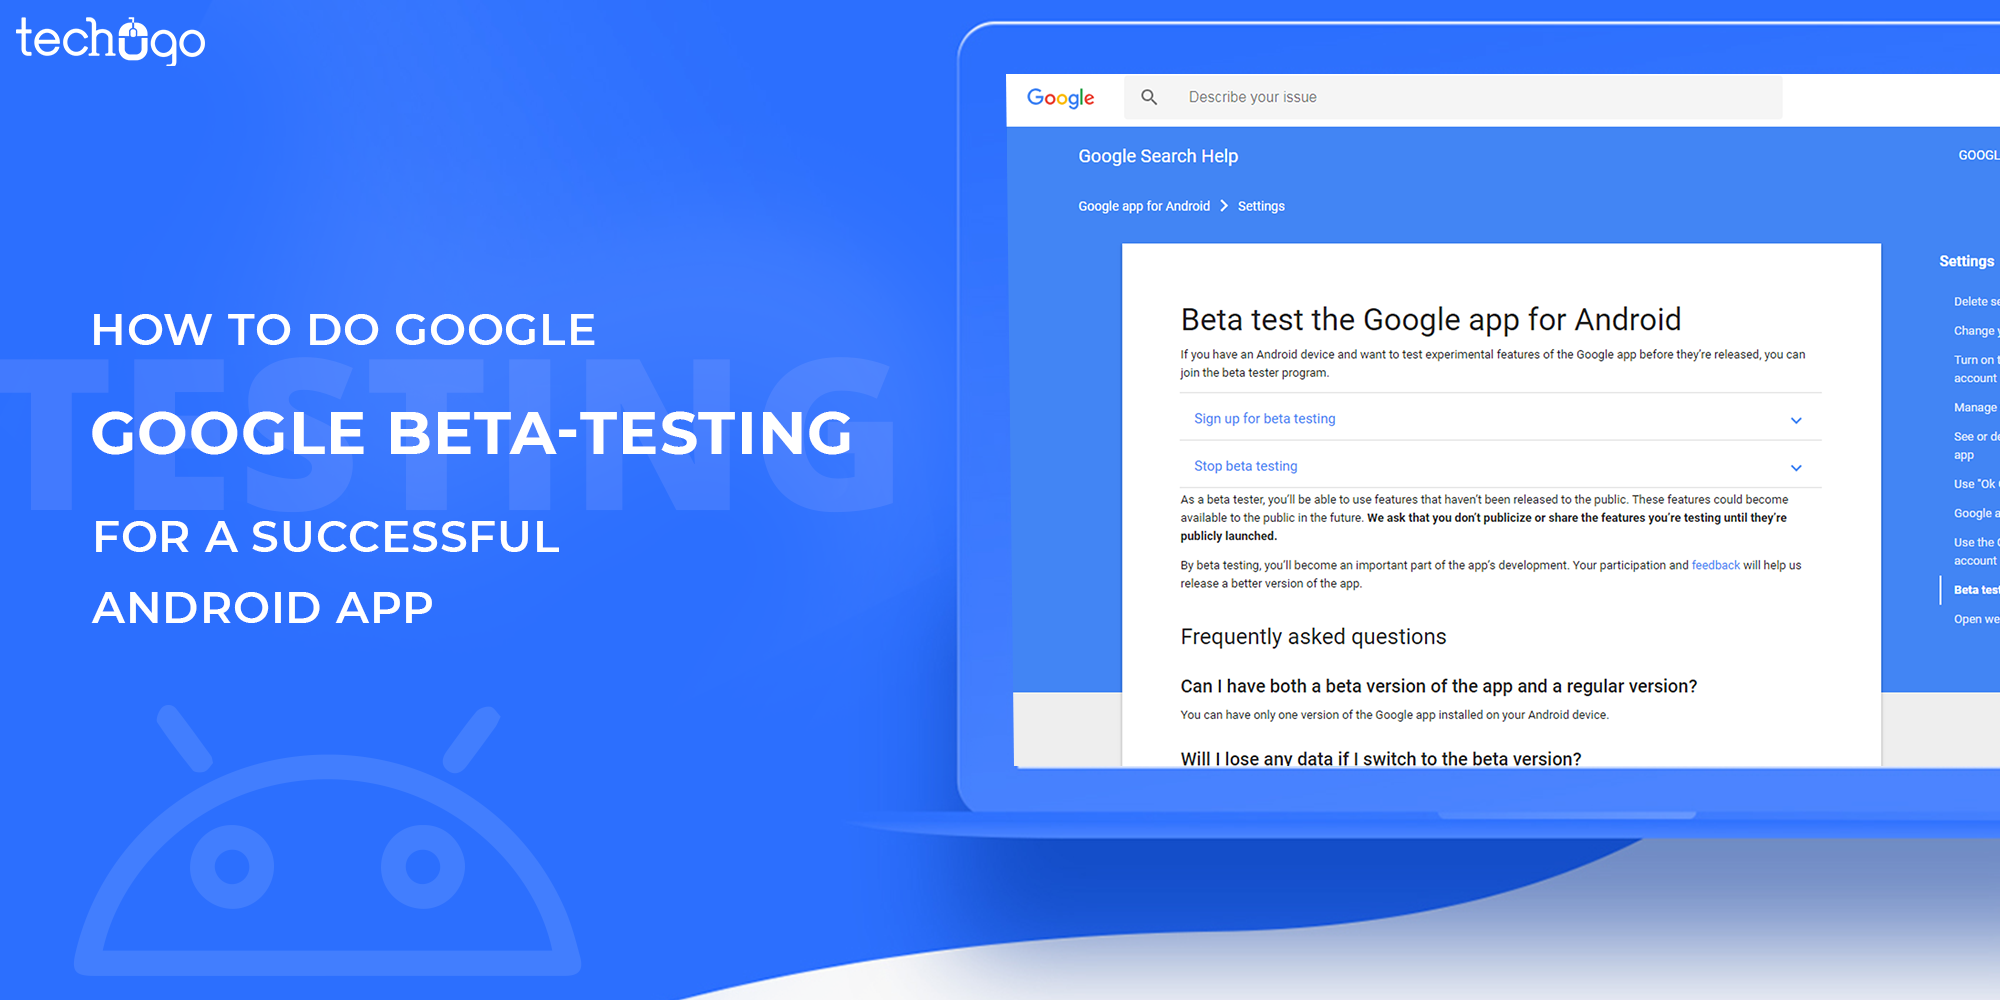 How To Do Google Beta-Testing For A Successful Android App